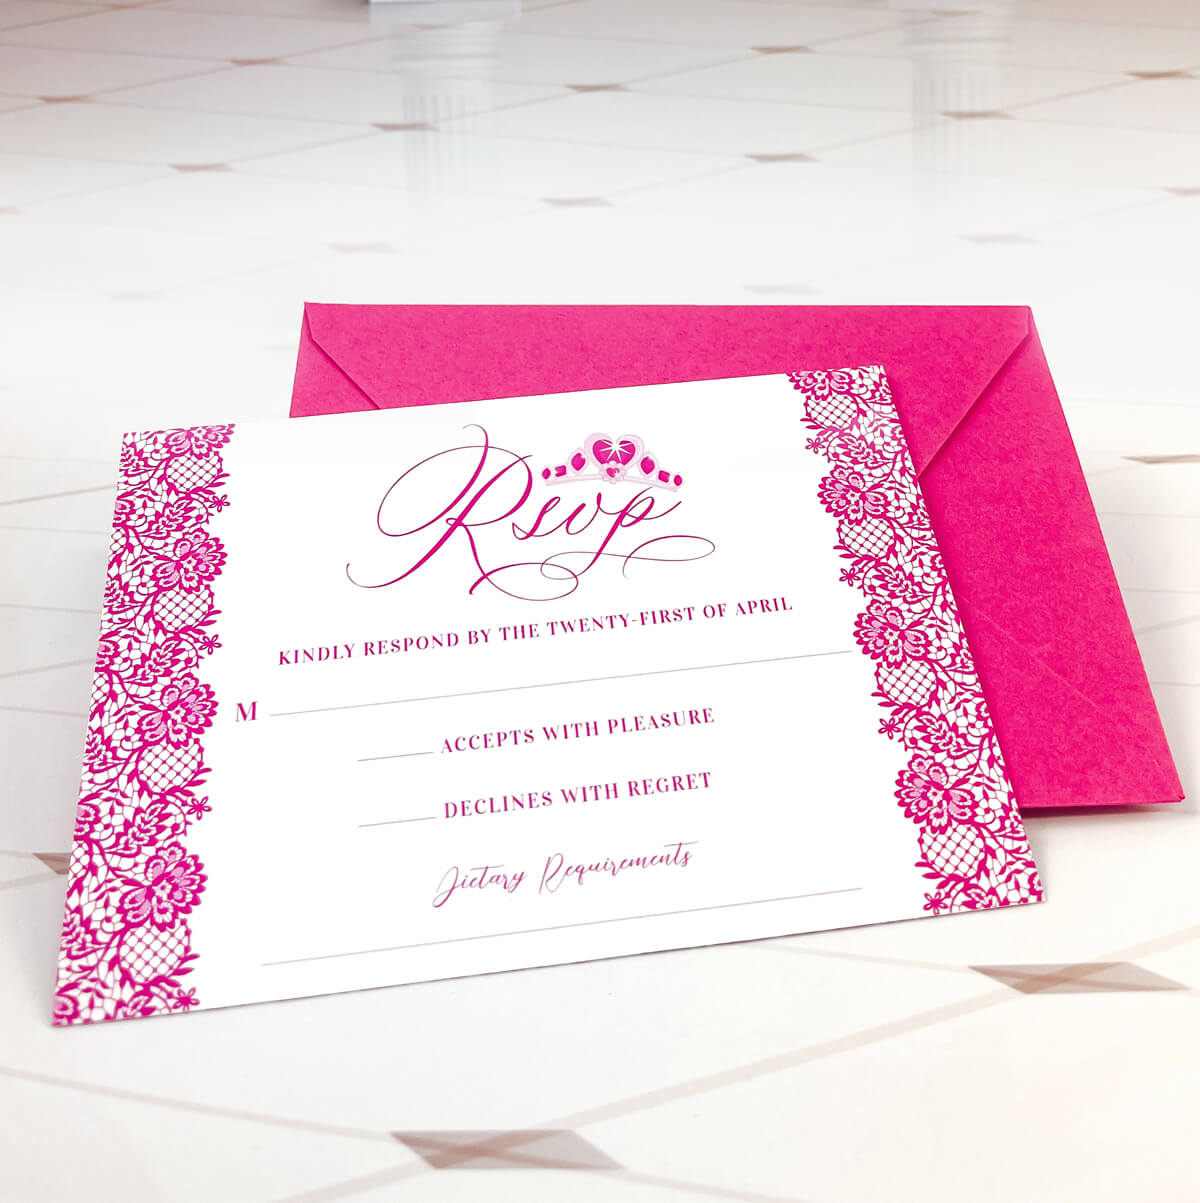 Quinceanera RSVP Card By Moodthology Papery